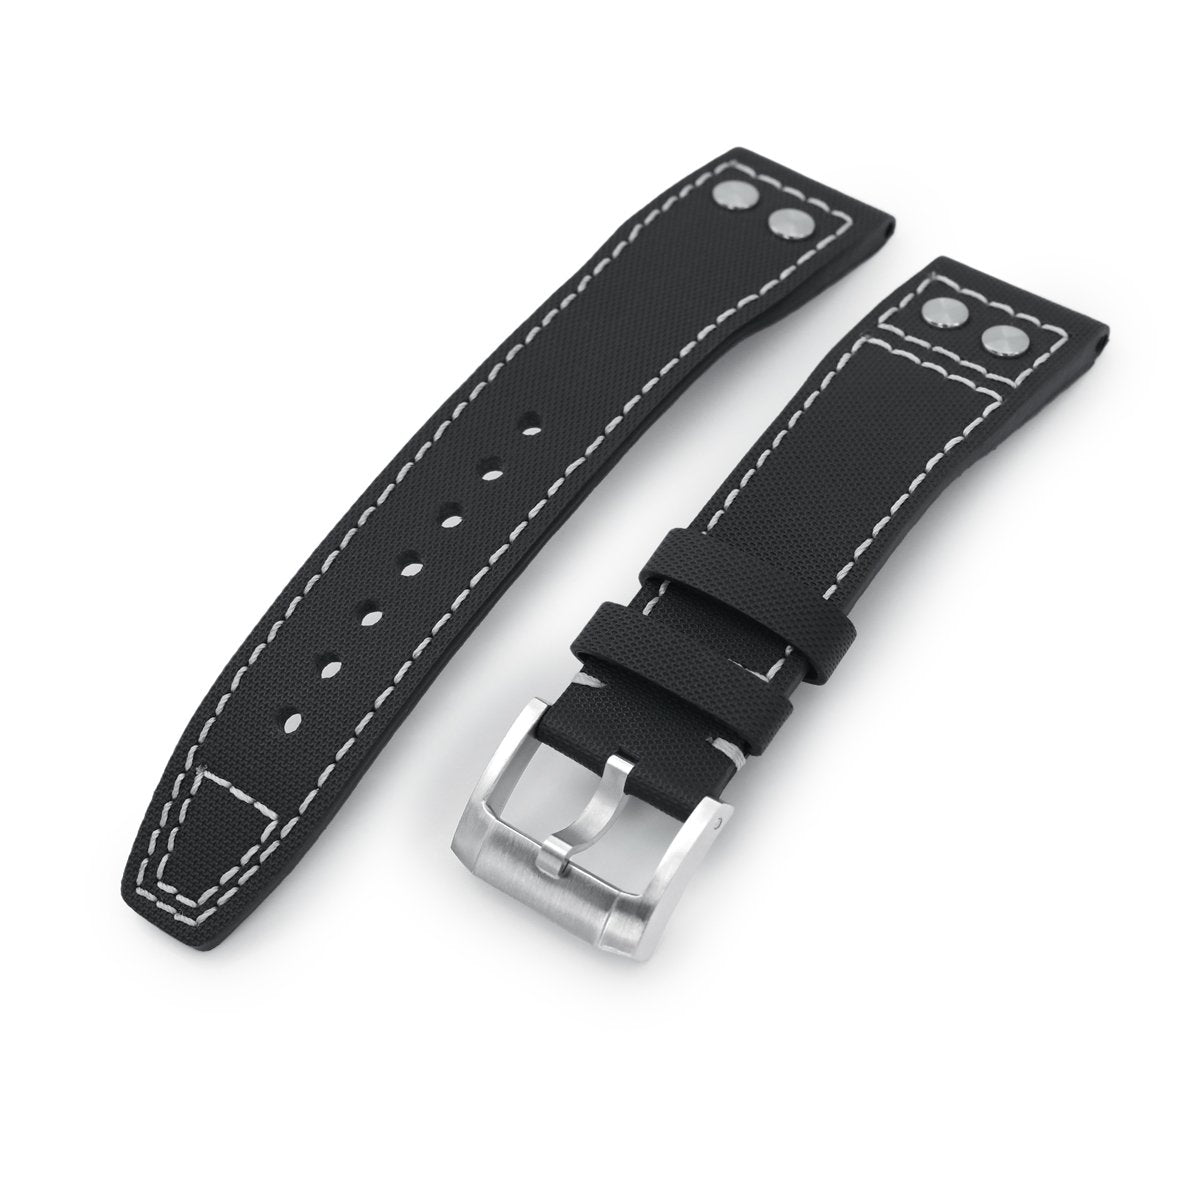 20mm to 23mm Pilot Black Woven Texture Rivet Lug Watch Strap Beige Stitching Brushed Strapcode Watch Bands